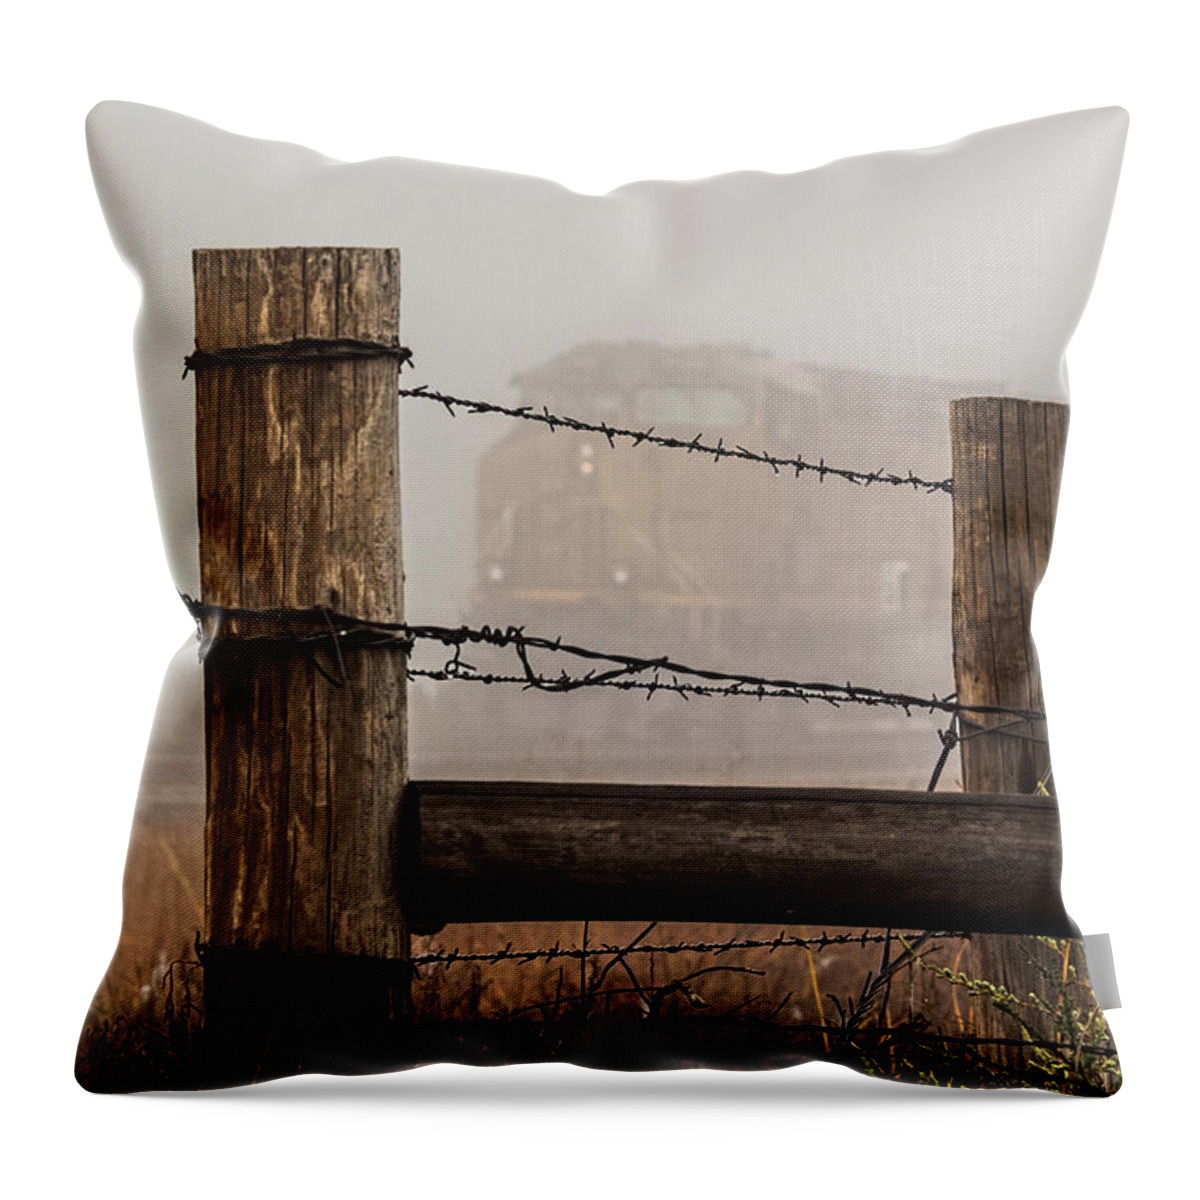 2014 September Throw Pillow featuring the photograph Fenced In by Bill Kesler